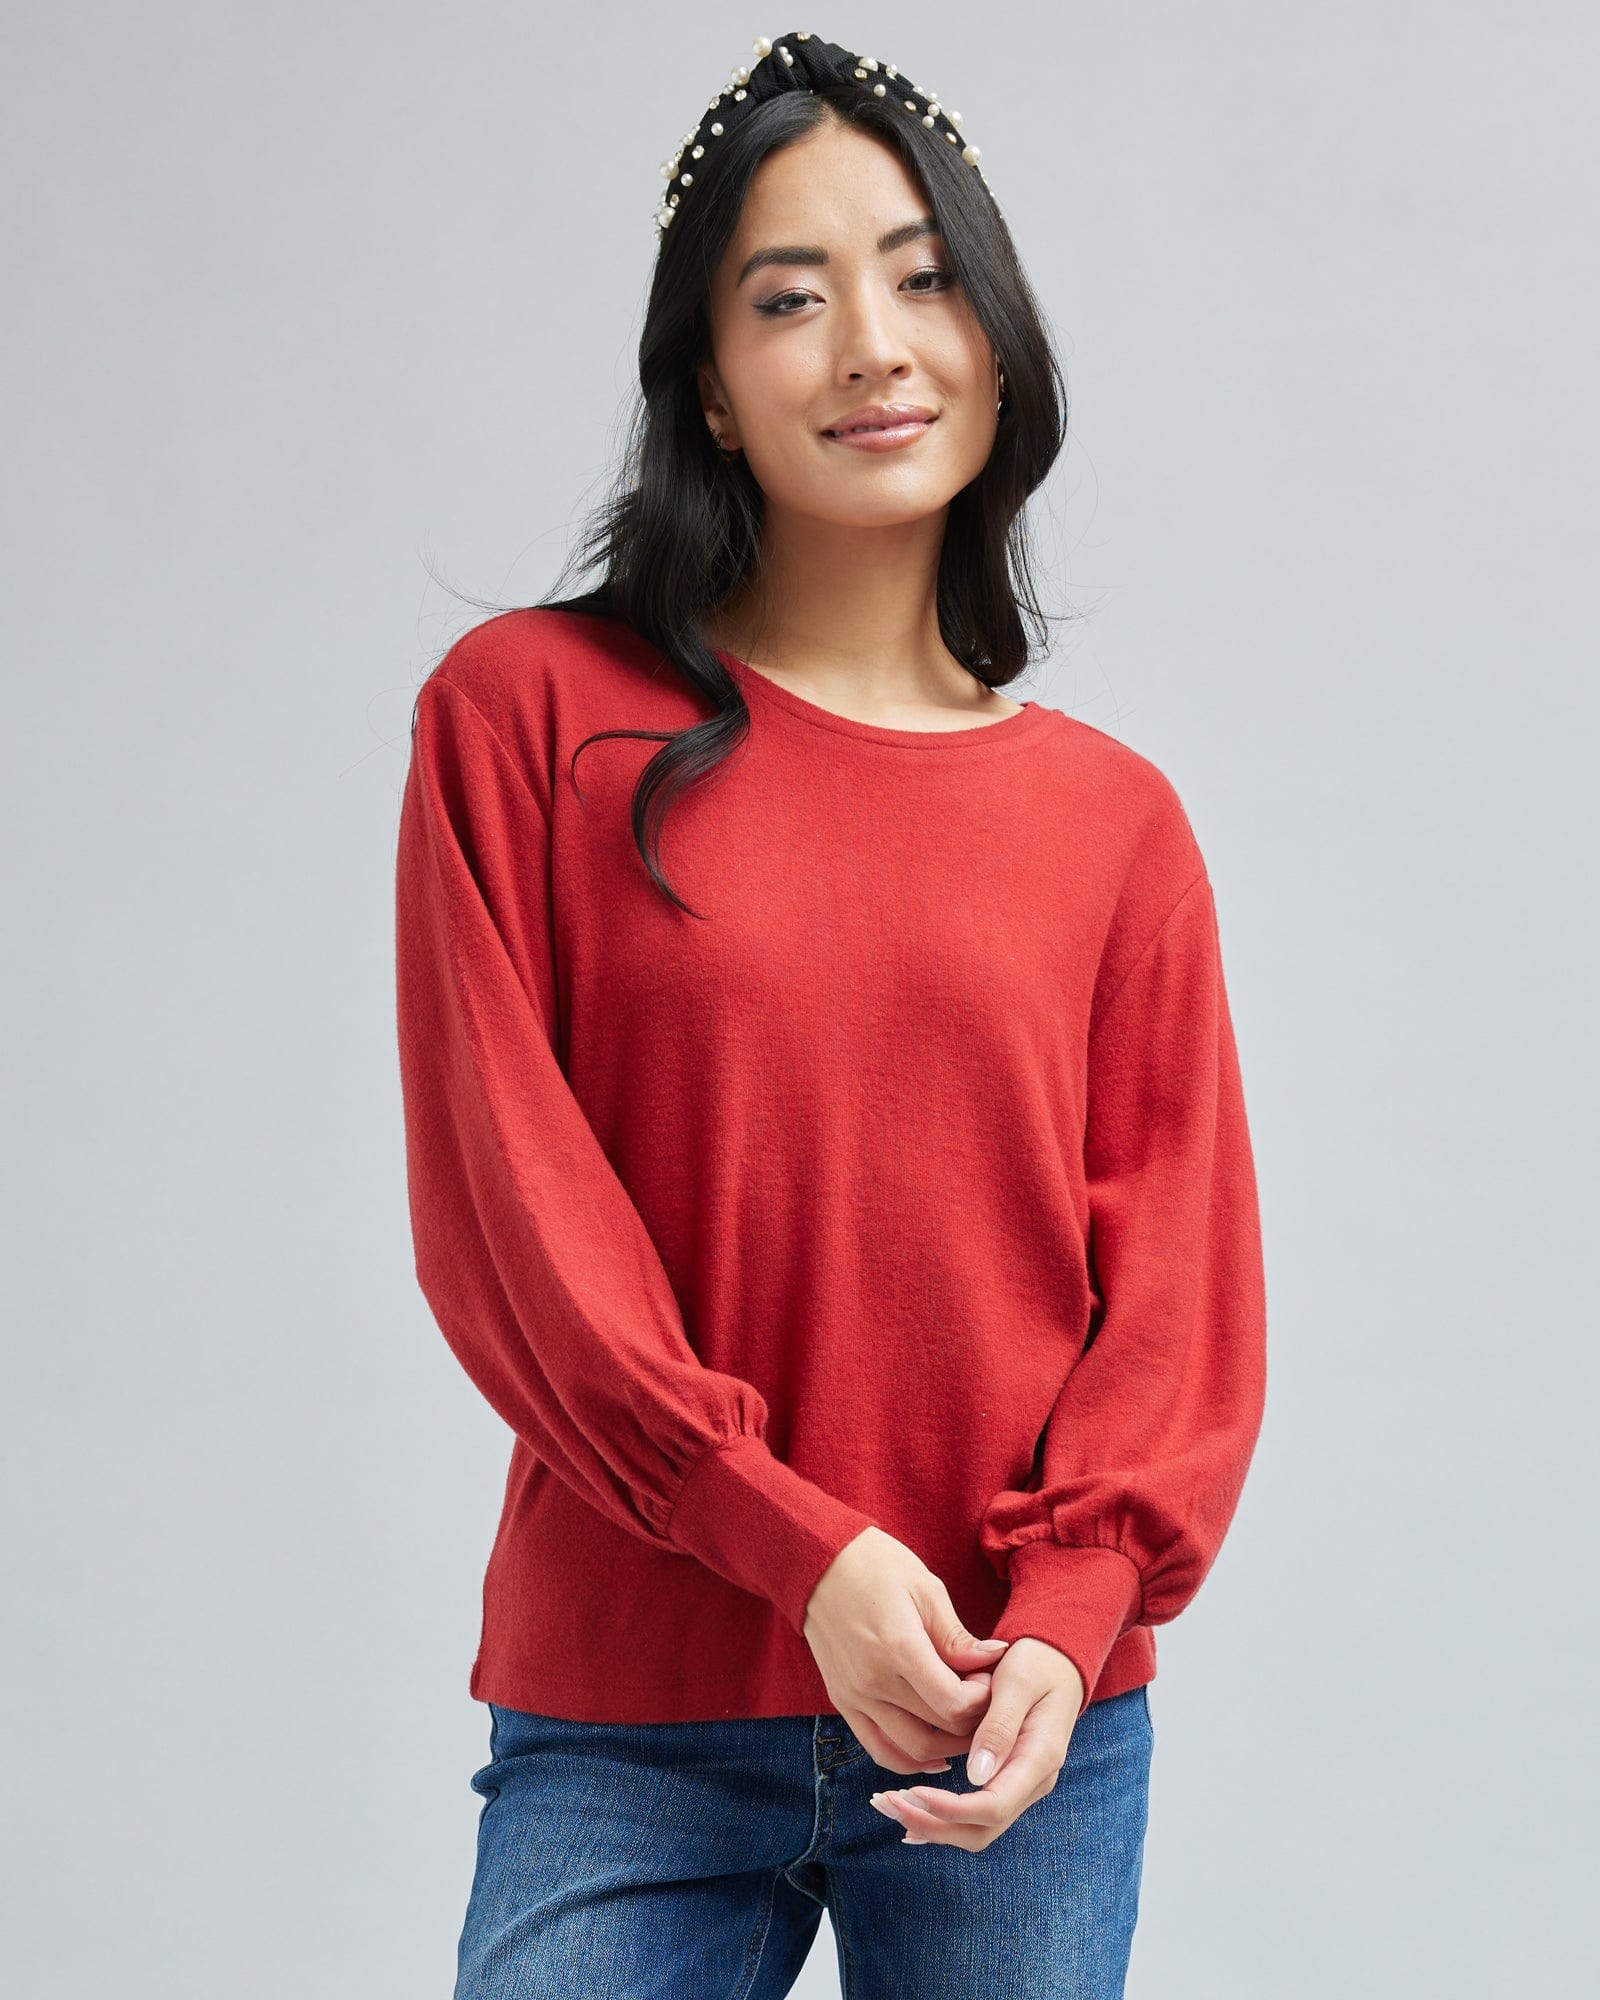 Woman in a long sleeve, red top